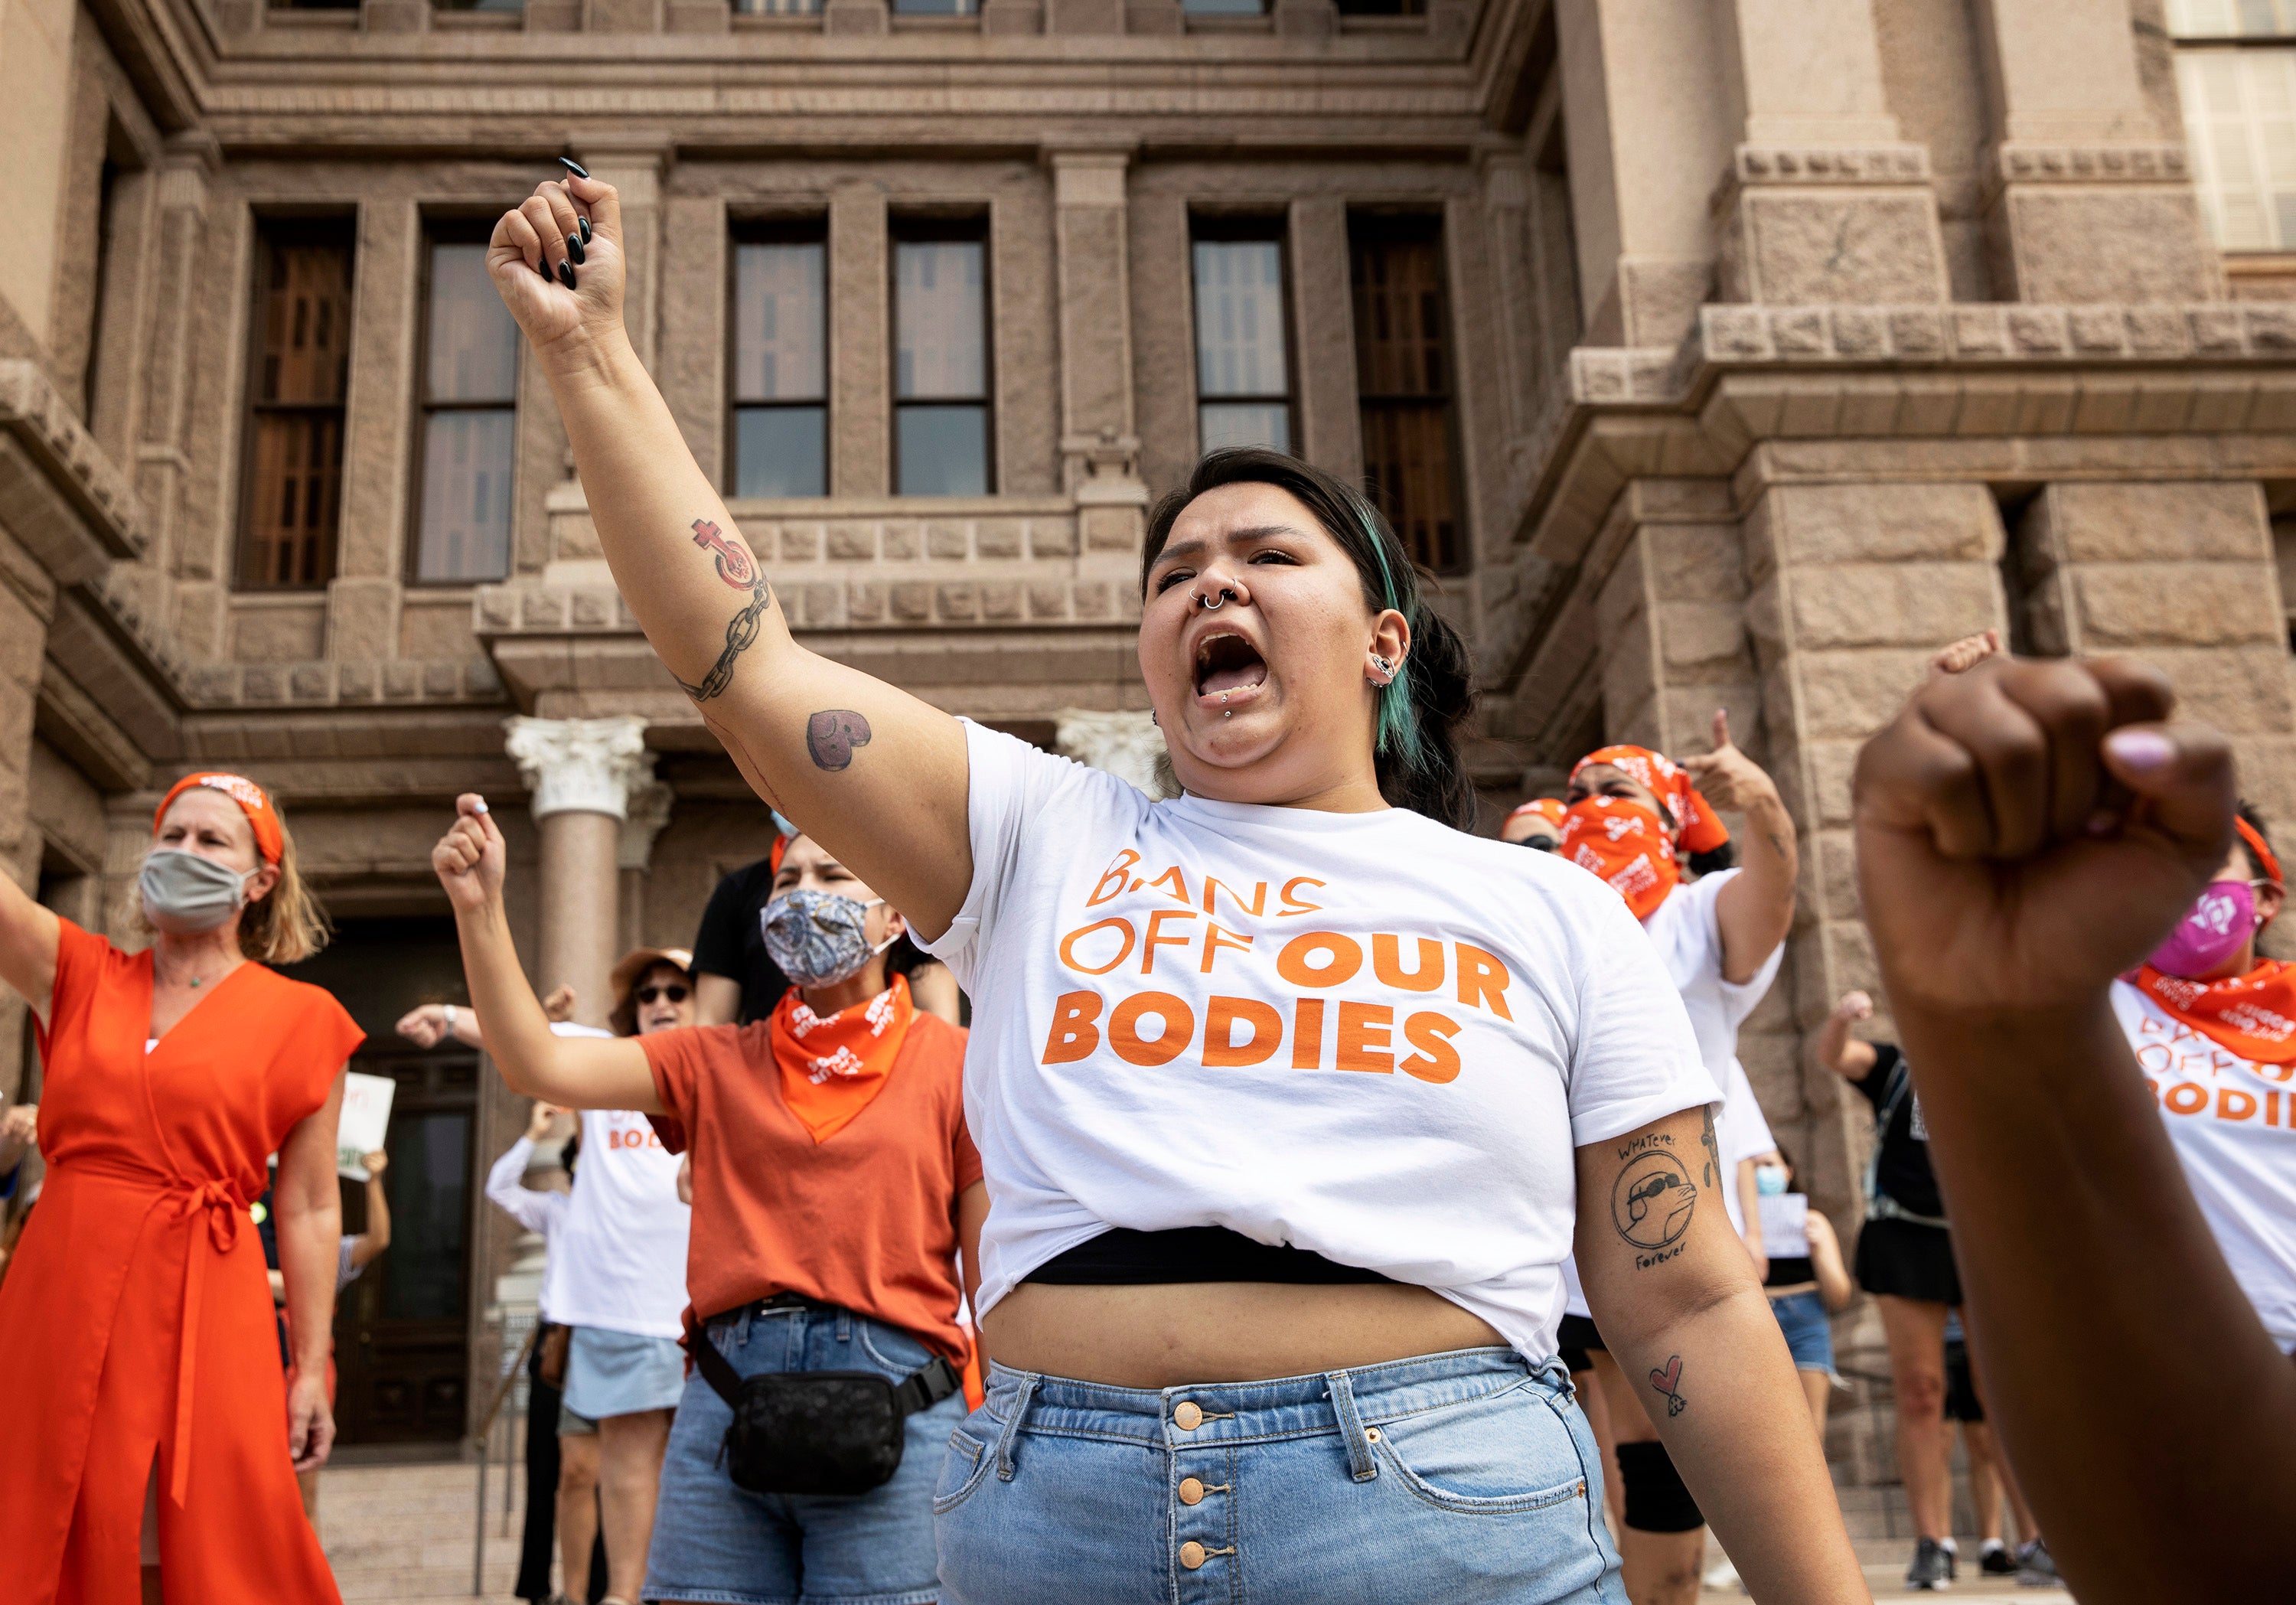 Abortion rights protesters rally outside of Texas’s state capital.